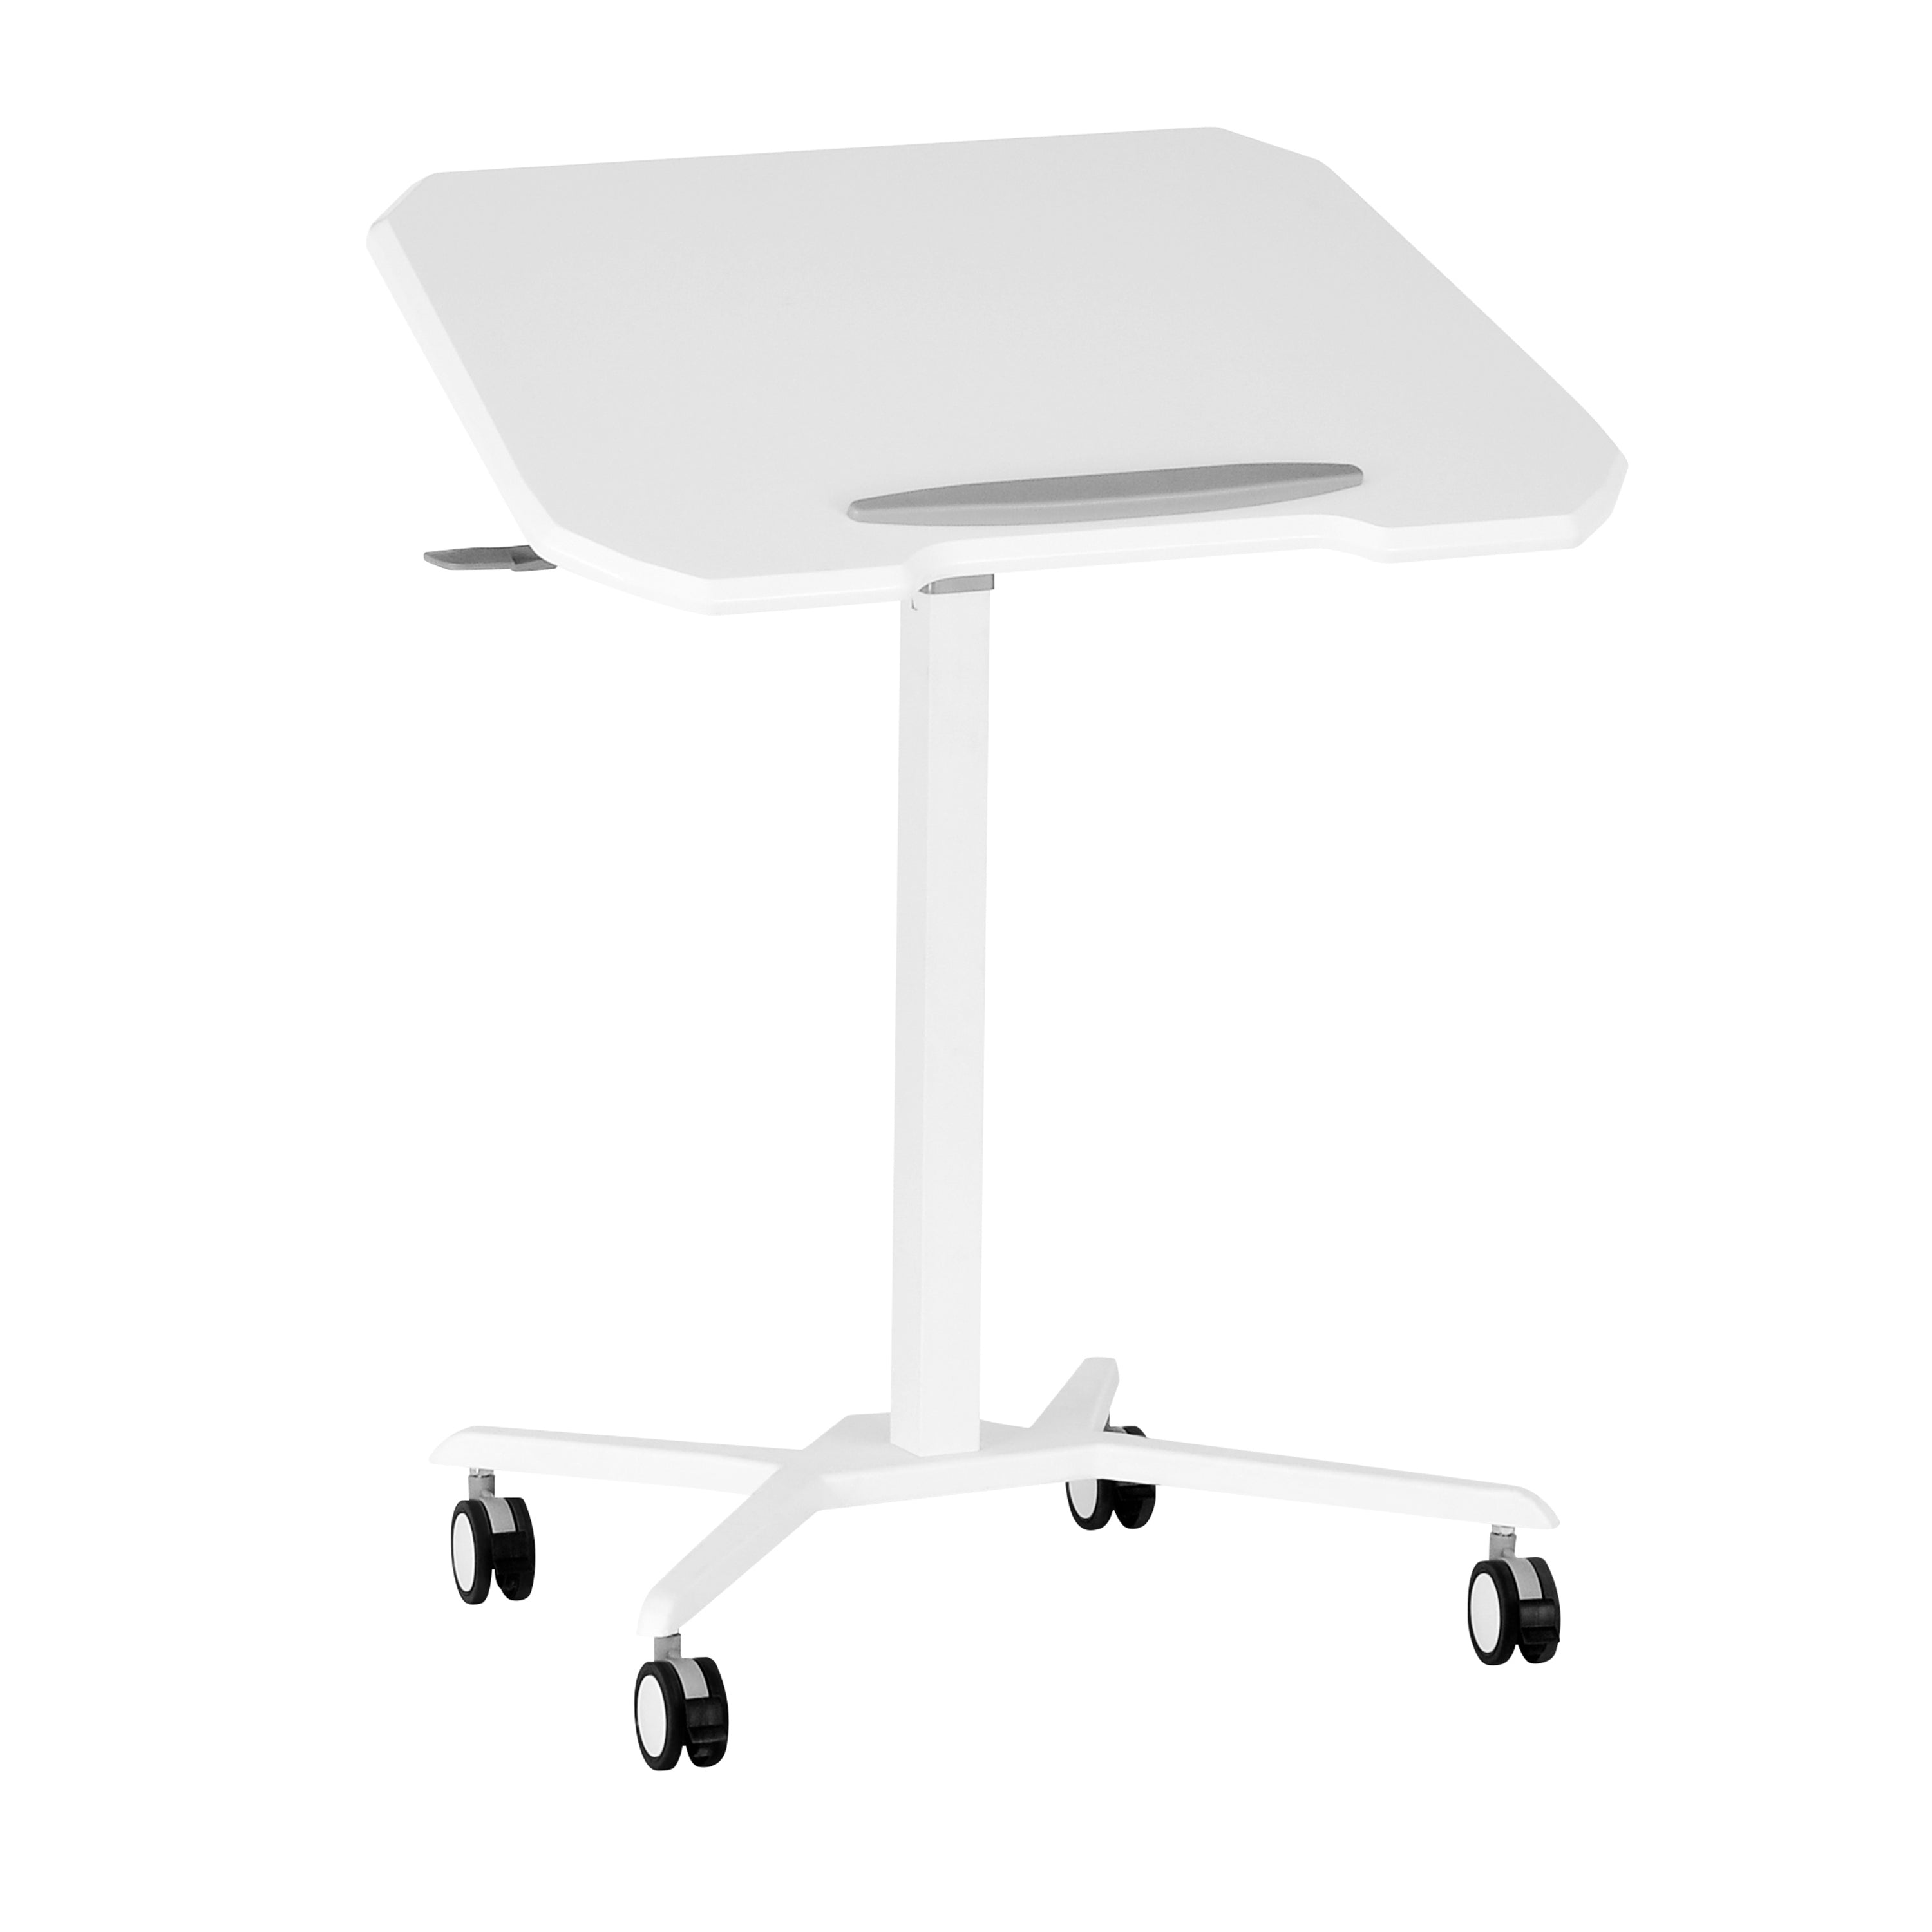 Mobile Laptop Support & Portable Stand